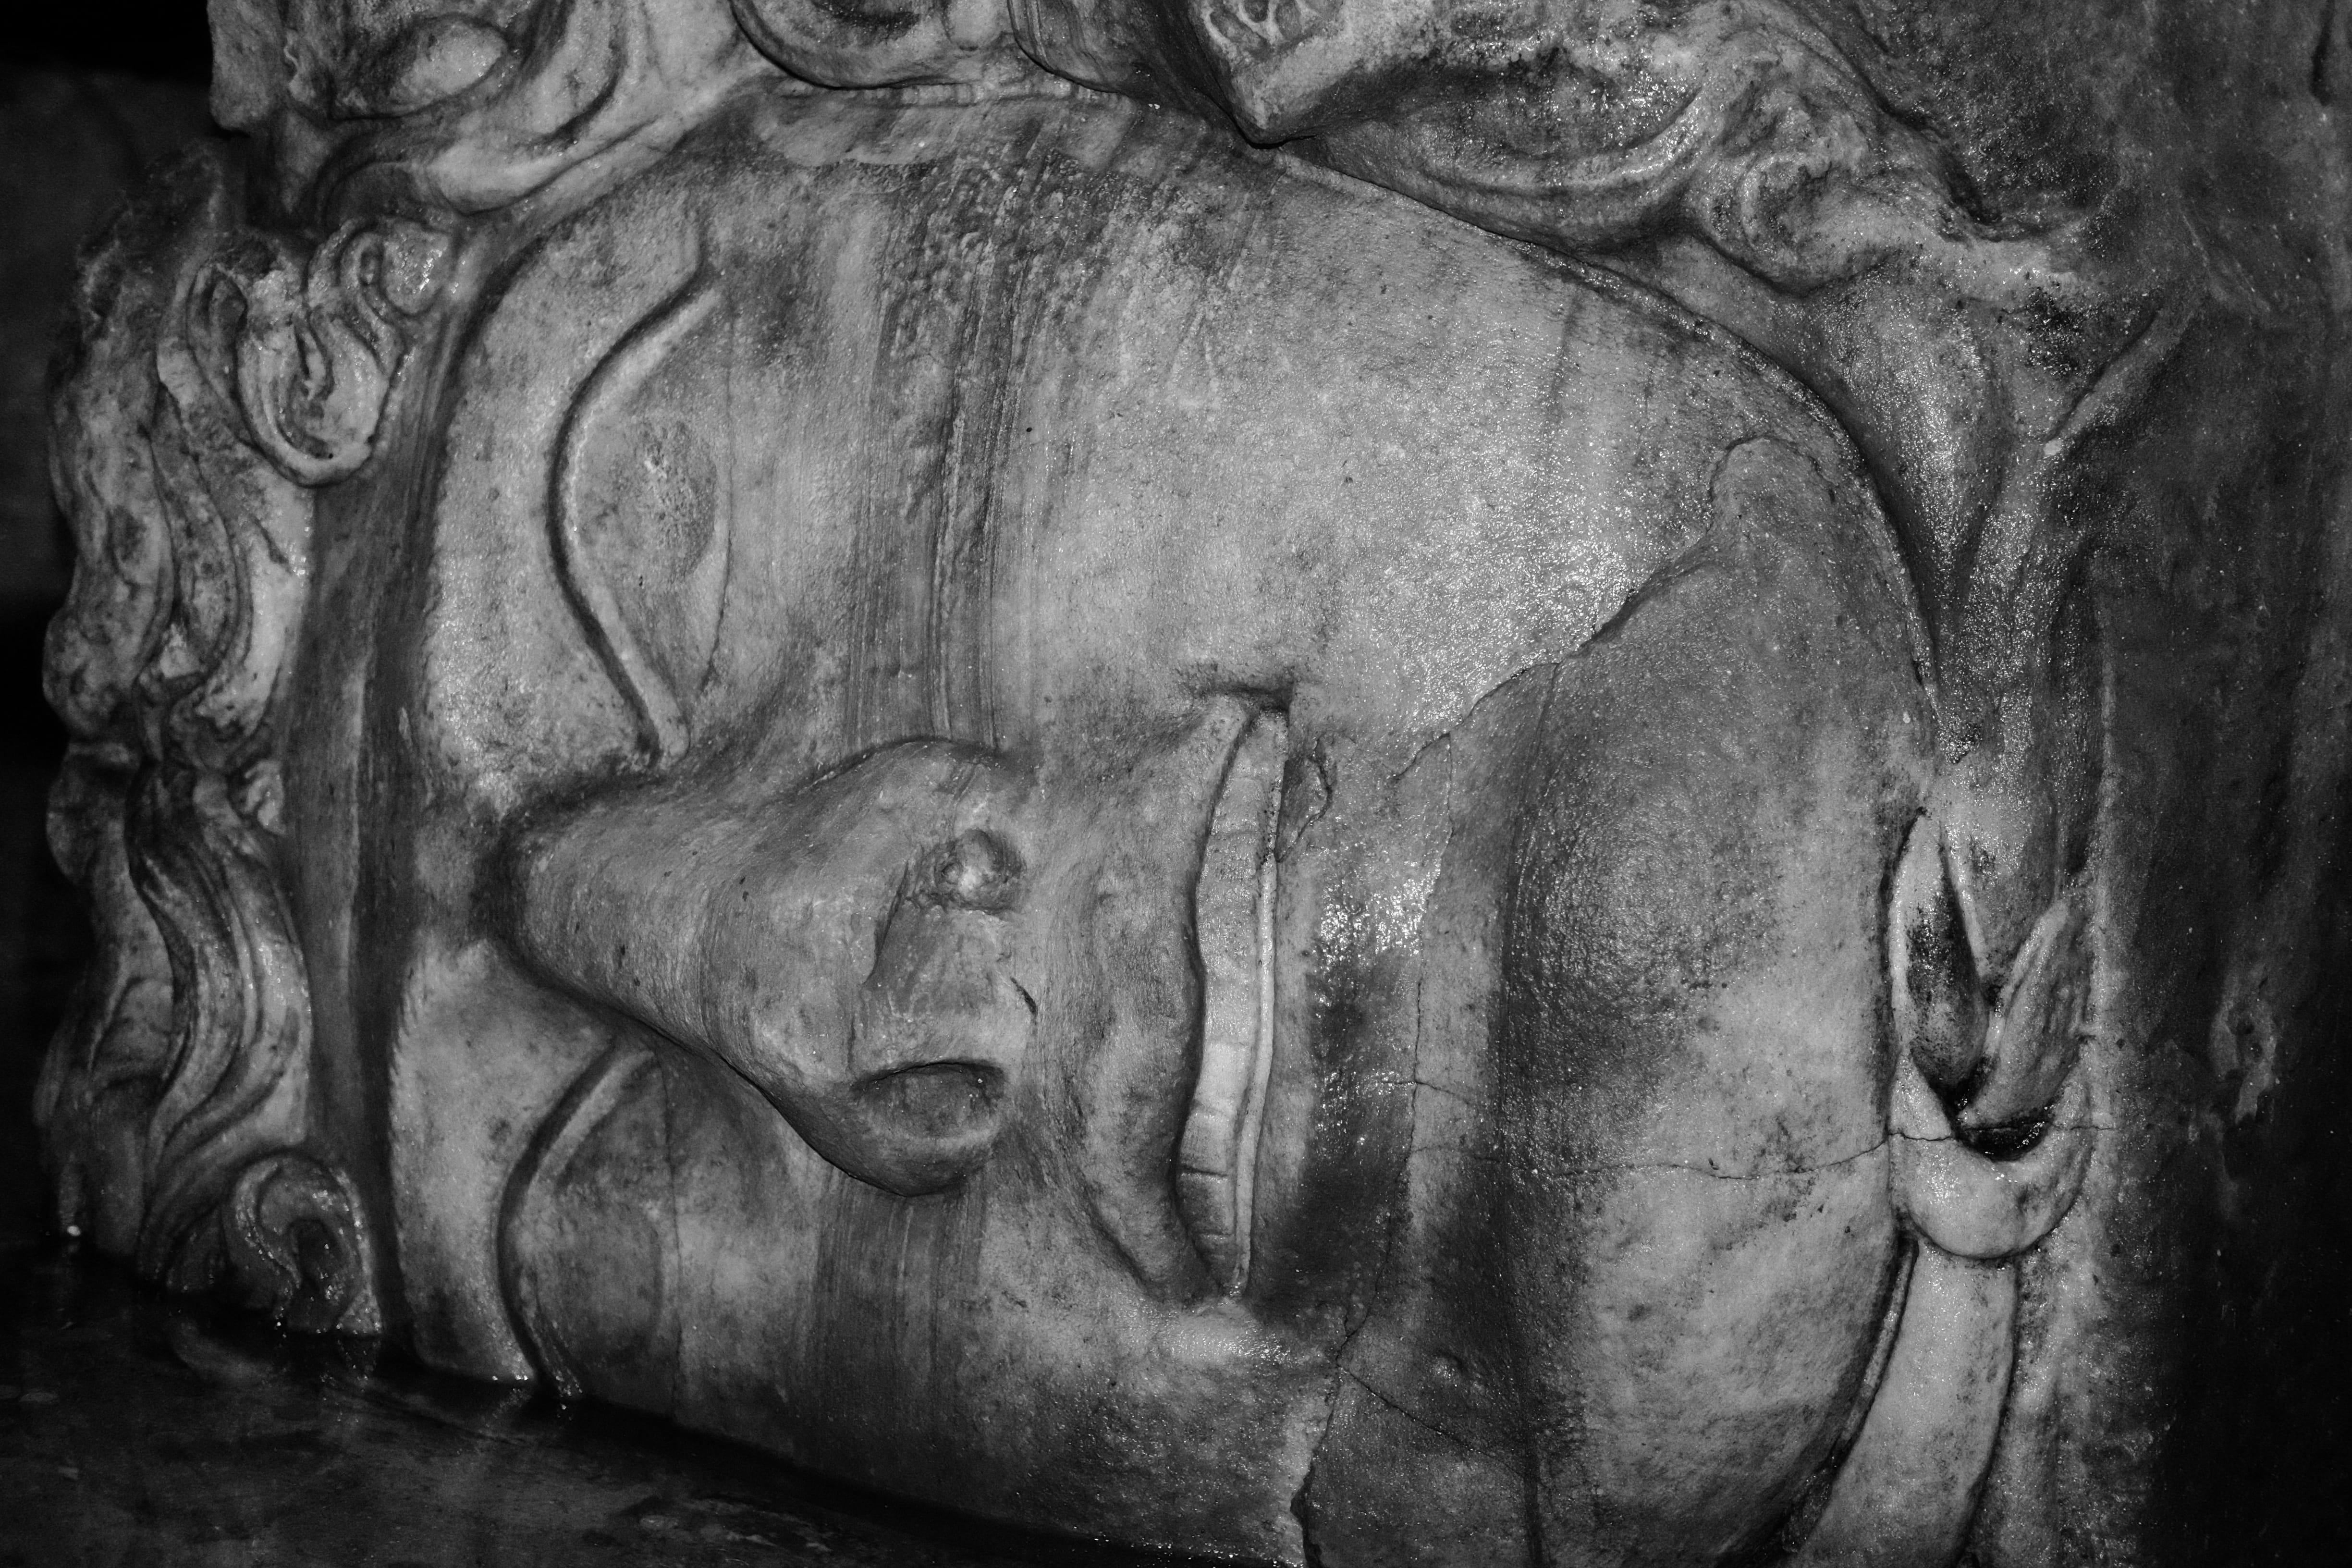 Close up of the Medusa head in the Basilica Cistern